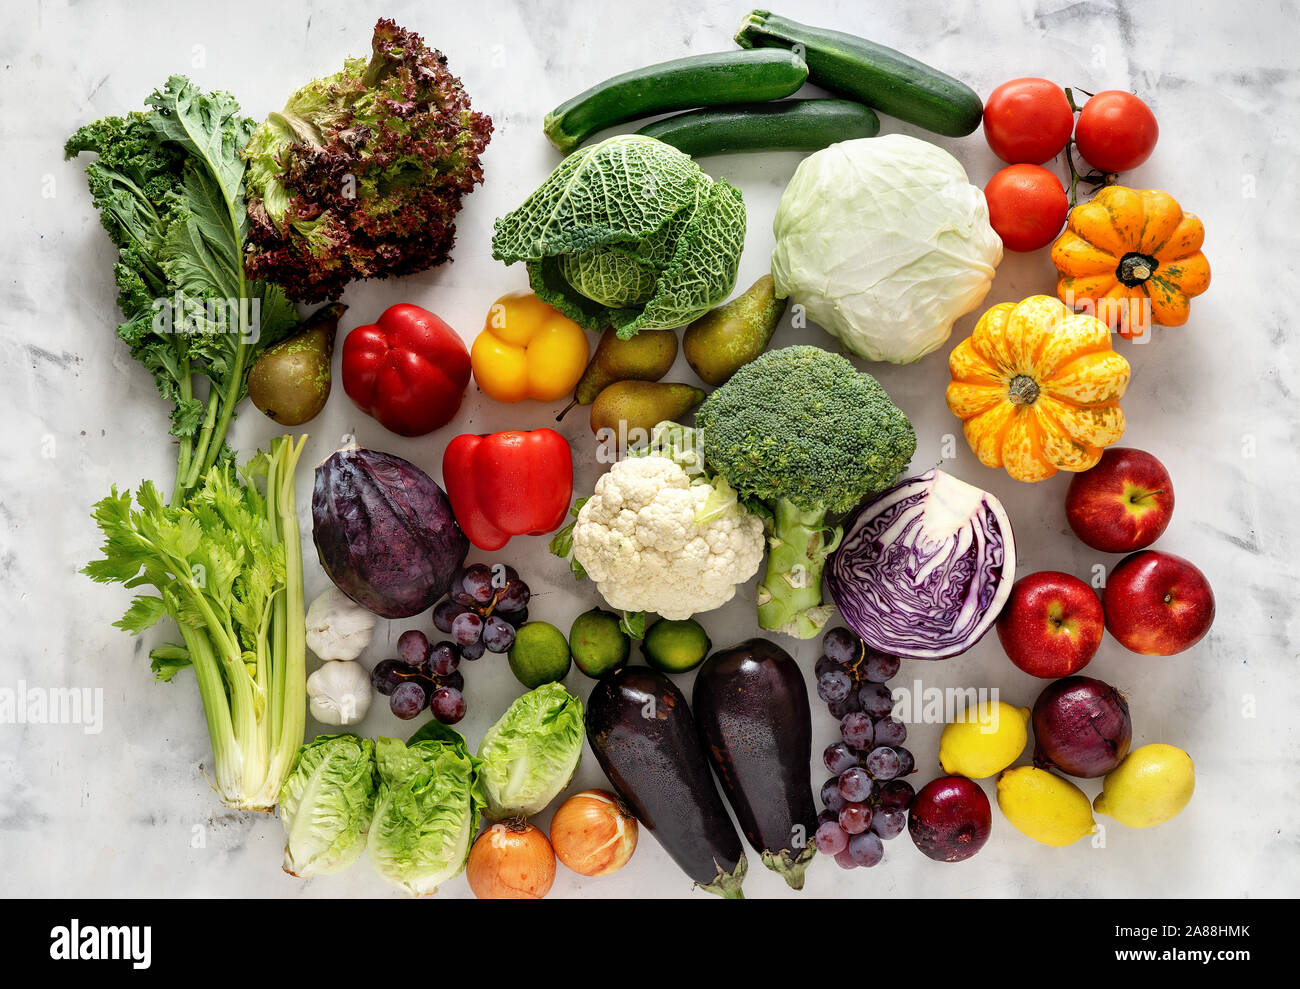 Healthy food concept. Vegetables and fruits on light background Stock Photo